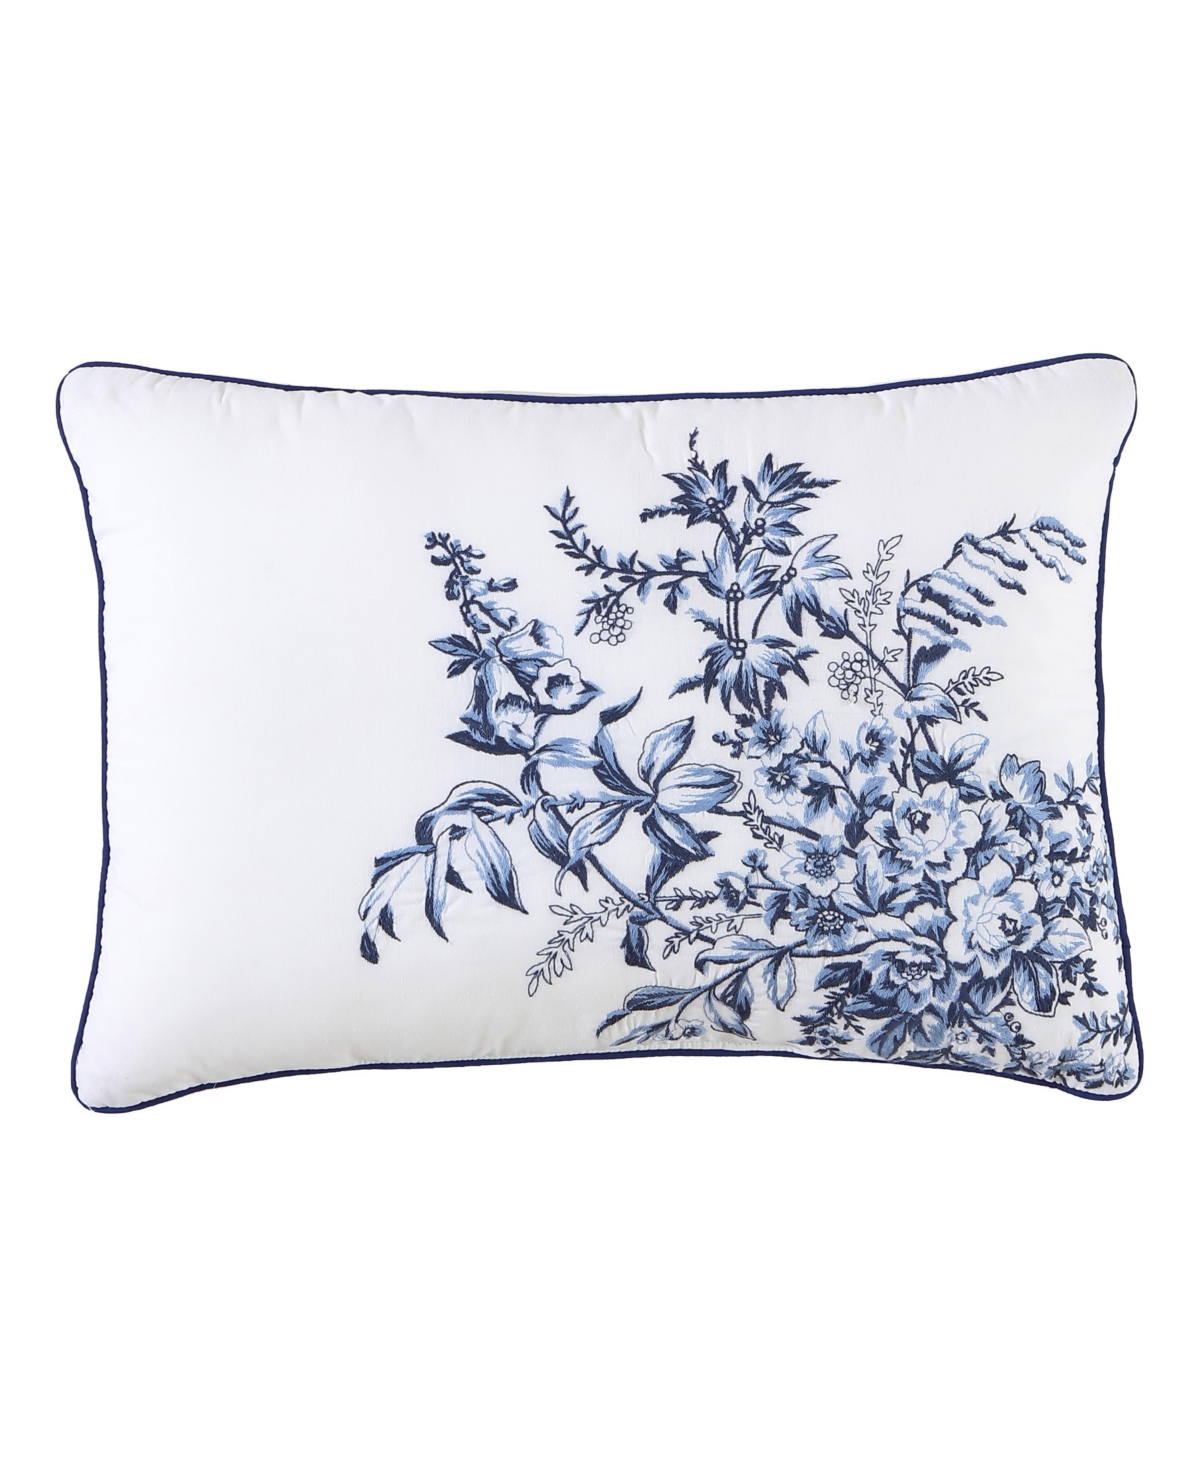 Laura Ashley Bedford Embroidered Decorative Pillow, 20" X 20" In Porcelain Blue